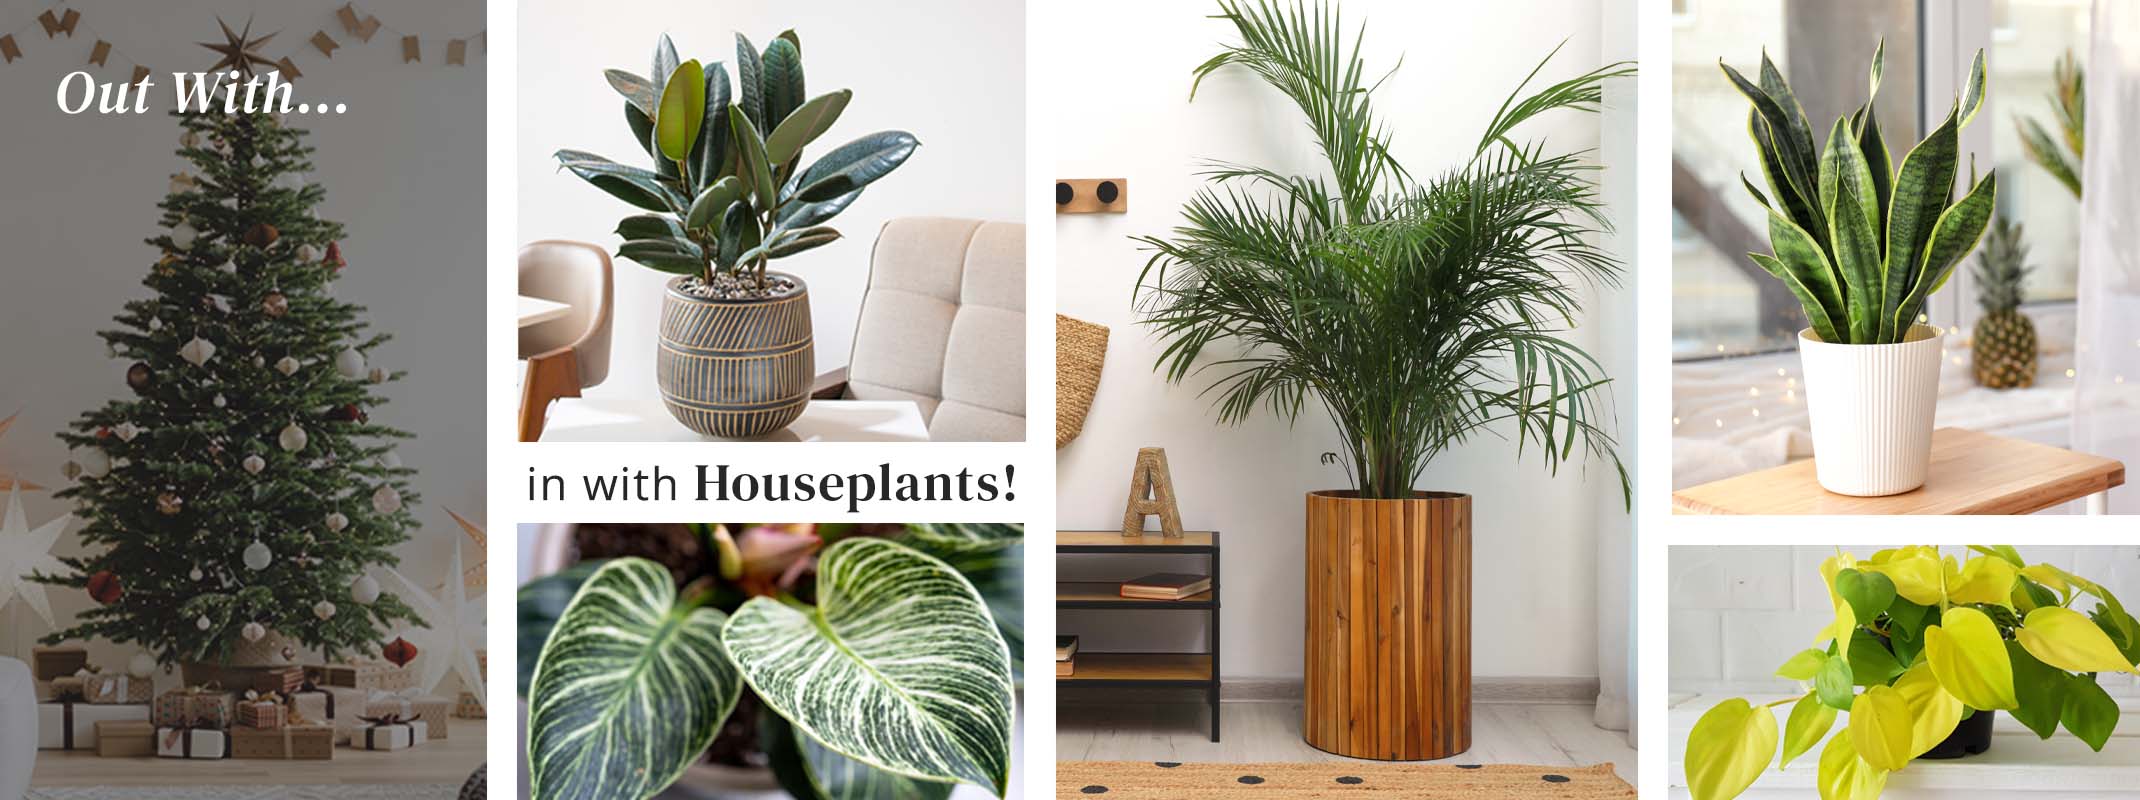 Beautiful selection of different potted houseplants shown as options for replacing christmas tree after the holidays with the say out with... and in with houseplants!